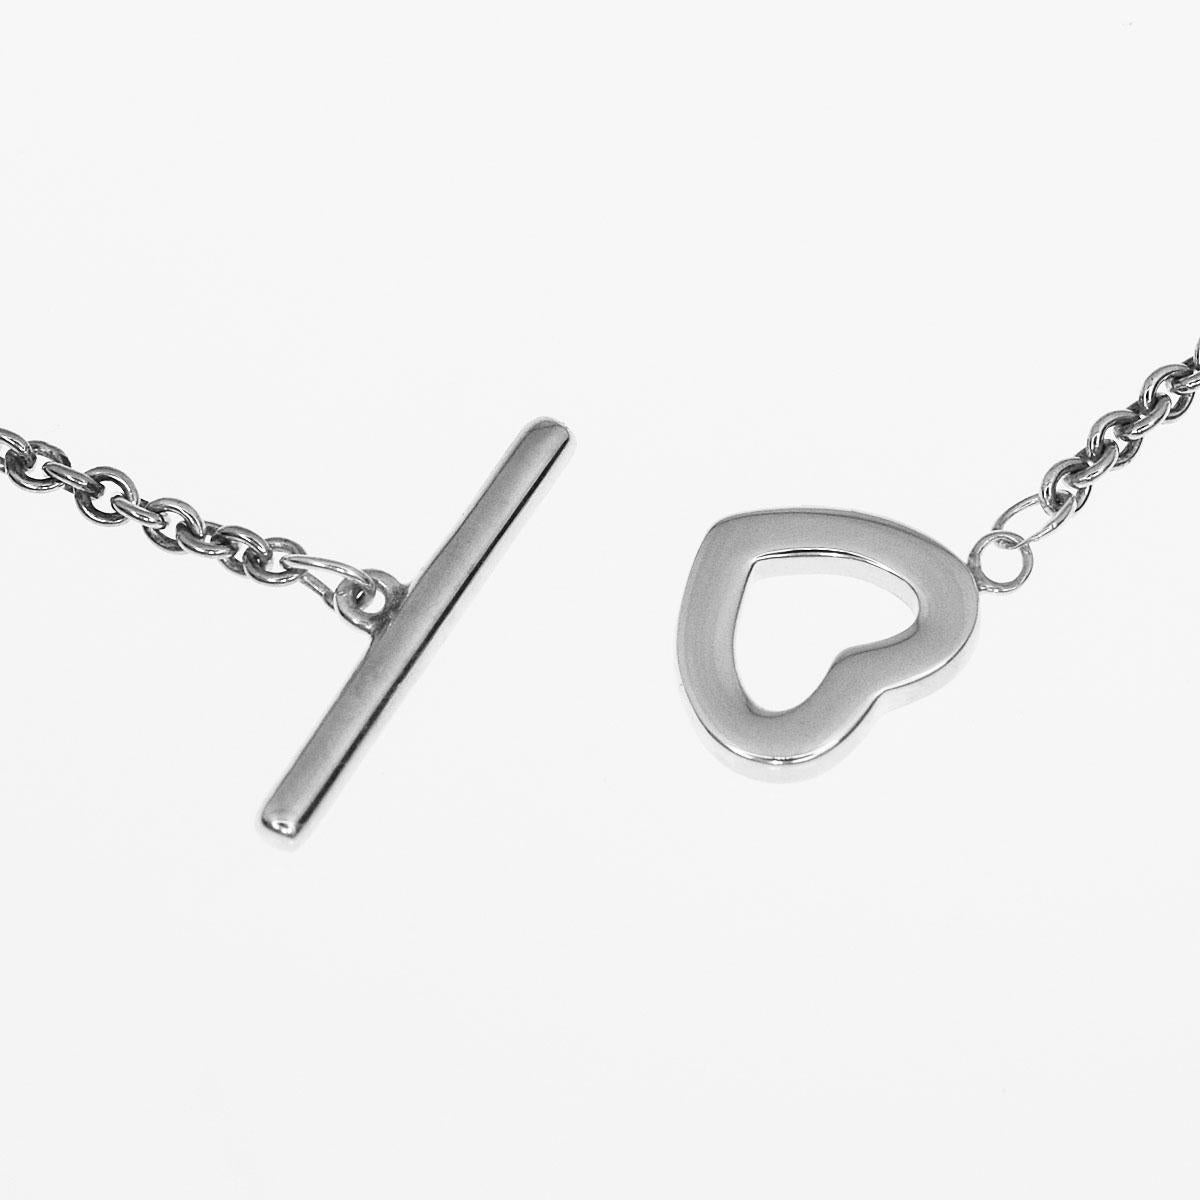 Brand:TIFFANY&Co. 
Name:Heart Bracelet
Material :925 SV Silver
Comes with:Tiffany Box, Pouch, Tiffany Card(Dec 2011)
Length:18cm/7.08